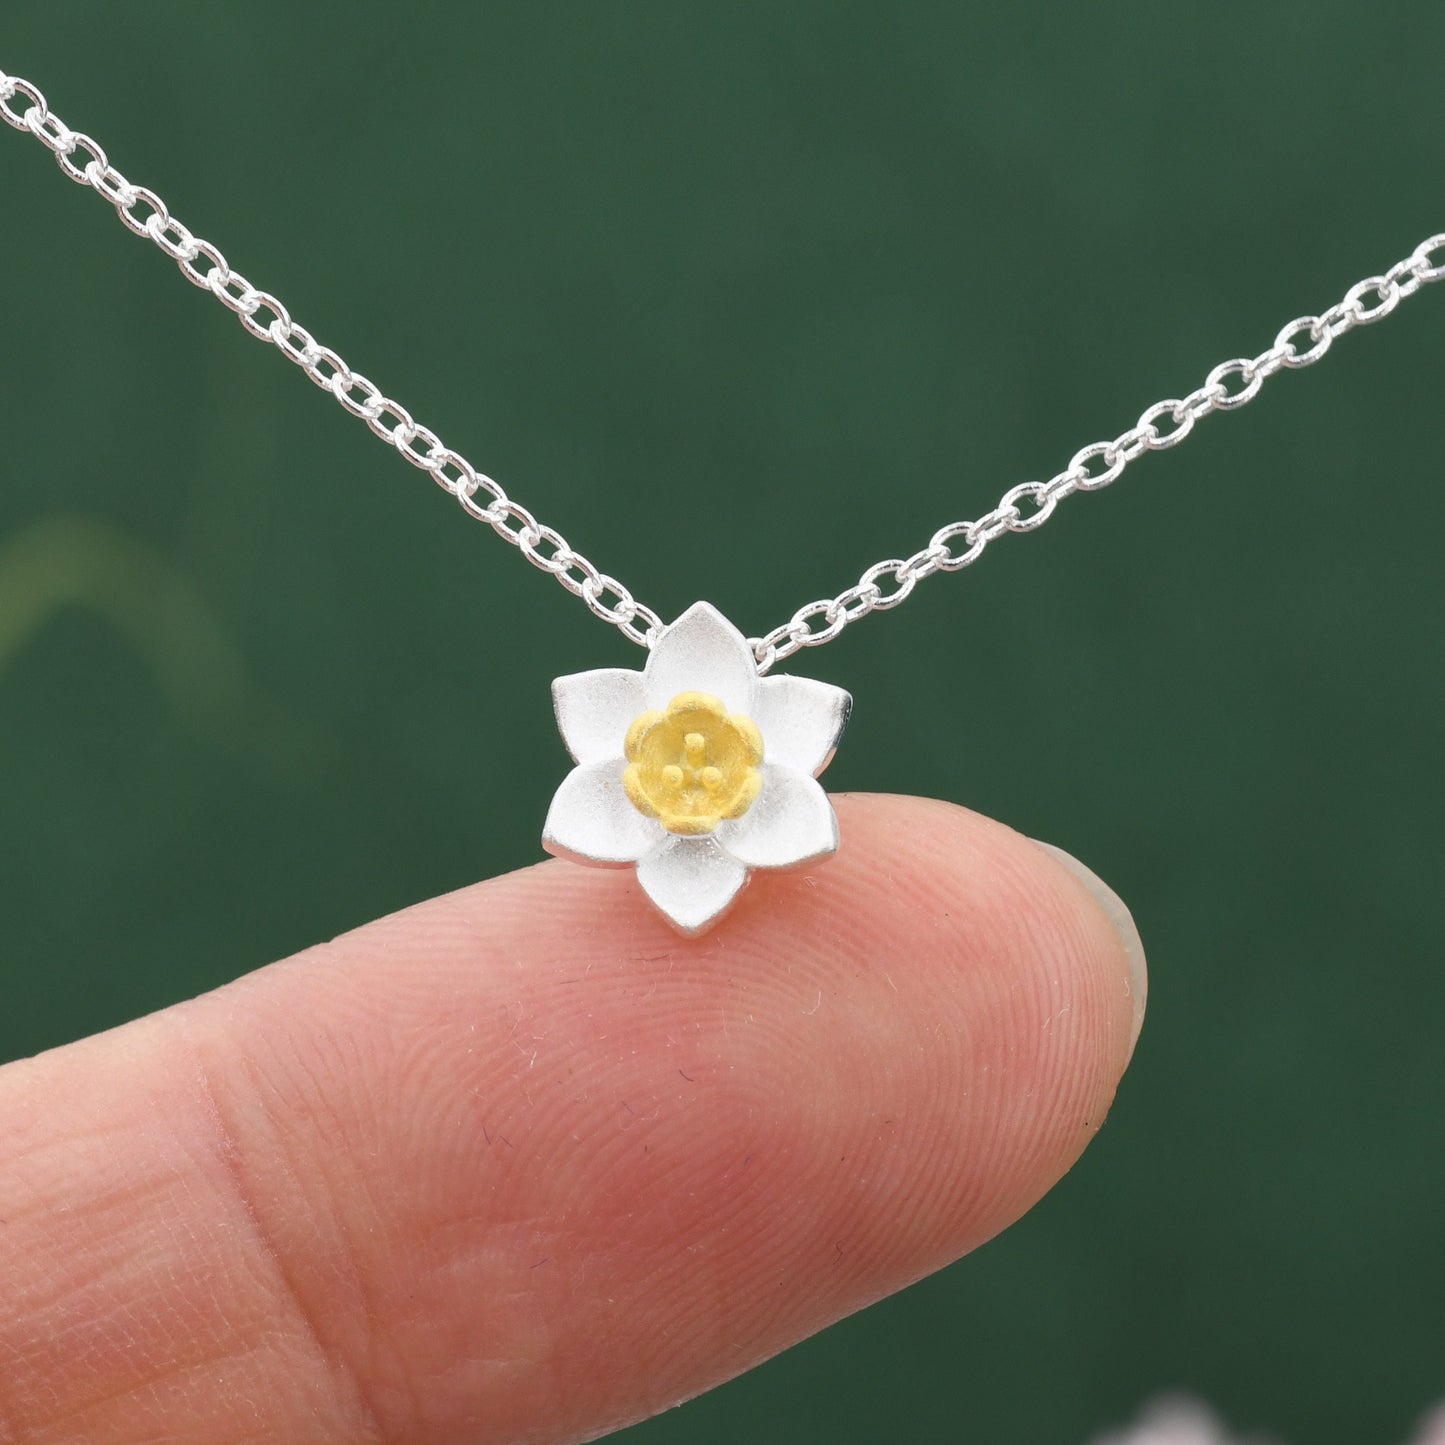 Sterling Silver Tiny Little Daffodil Flower Blossom Pendant Necklace with 18ct Gold Plating - Cute and Whimsical Jewellery